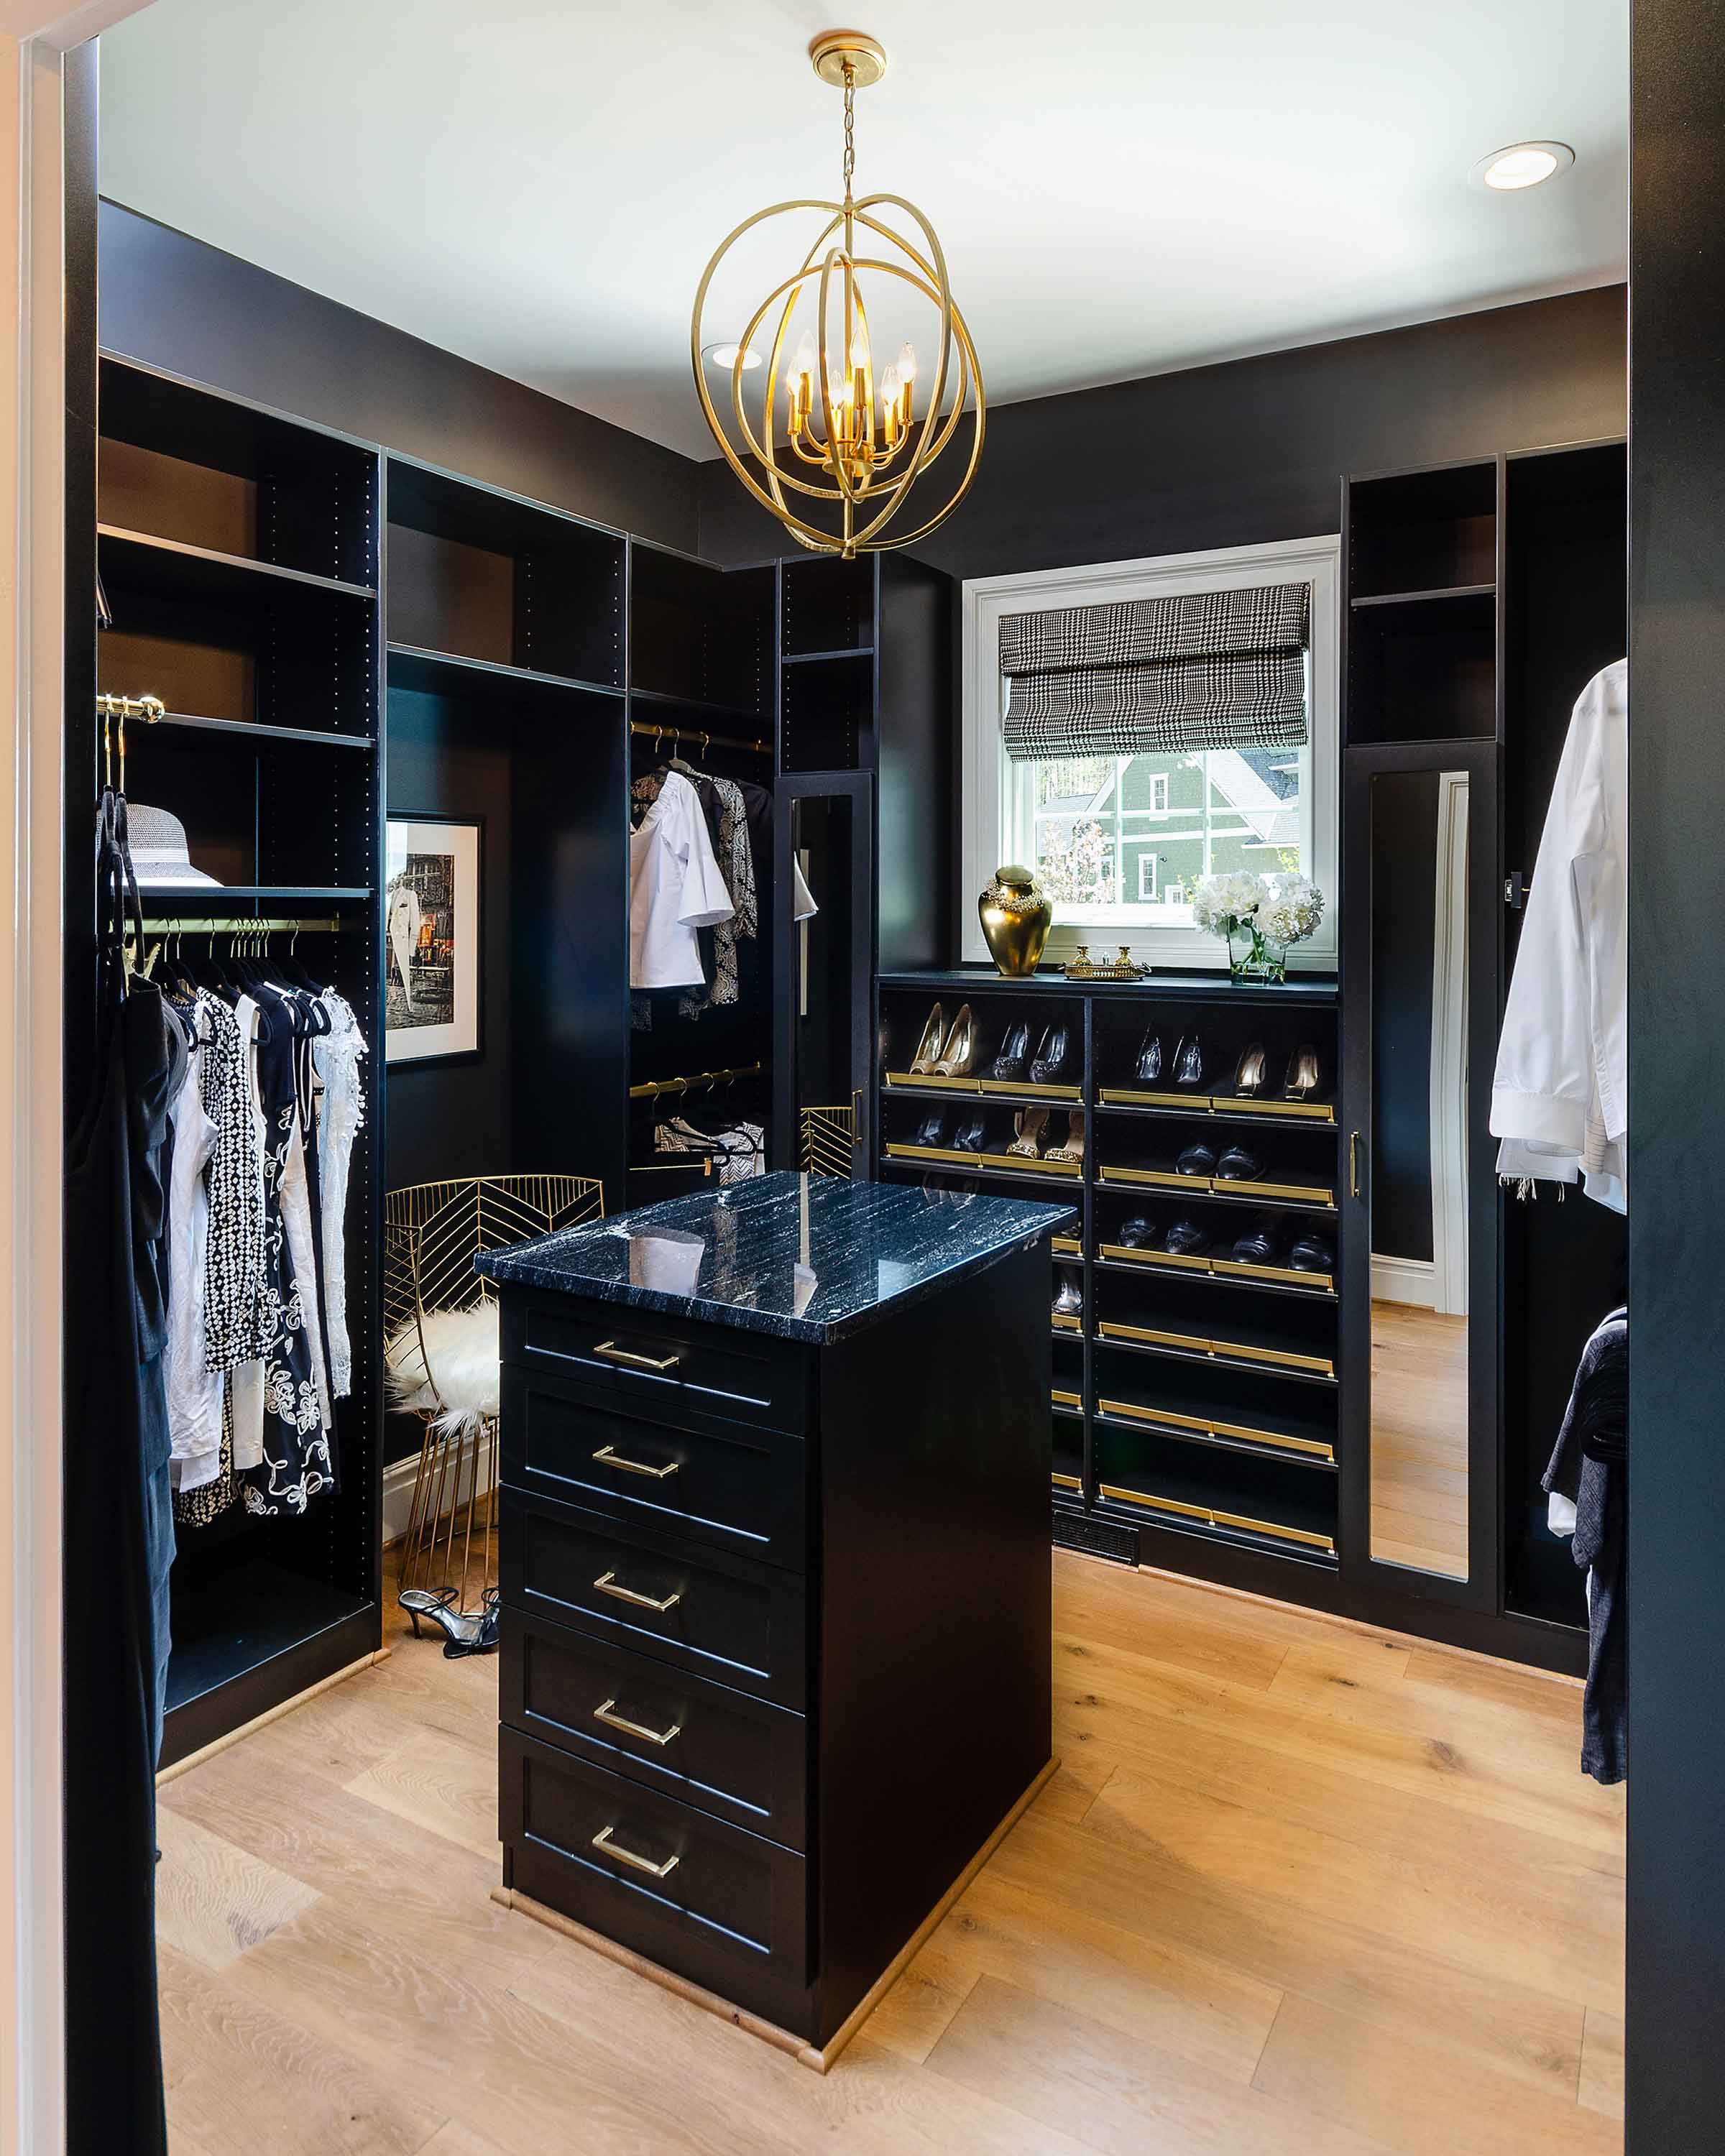 Stylish Closet Systems: How Style Creates Luxury to Match Your Home